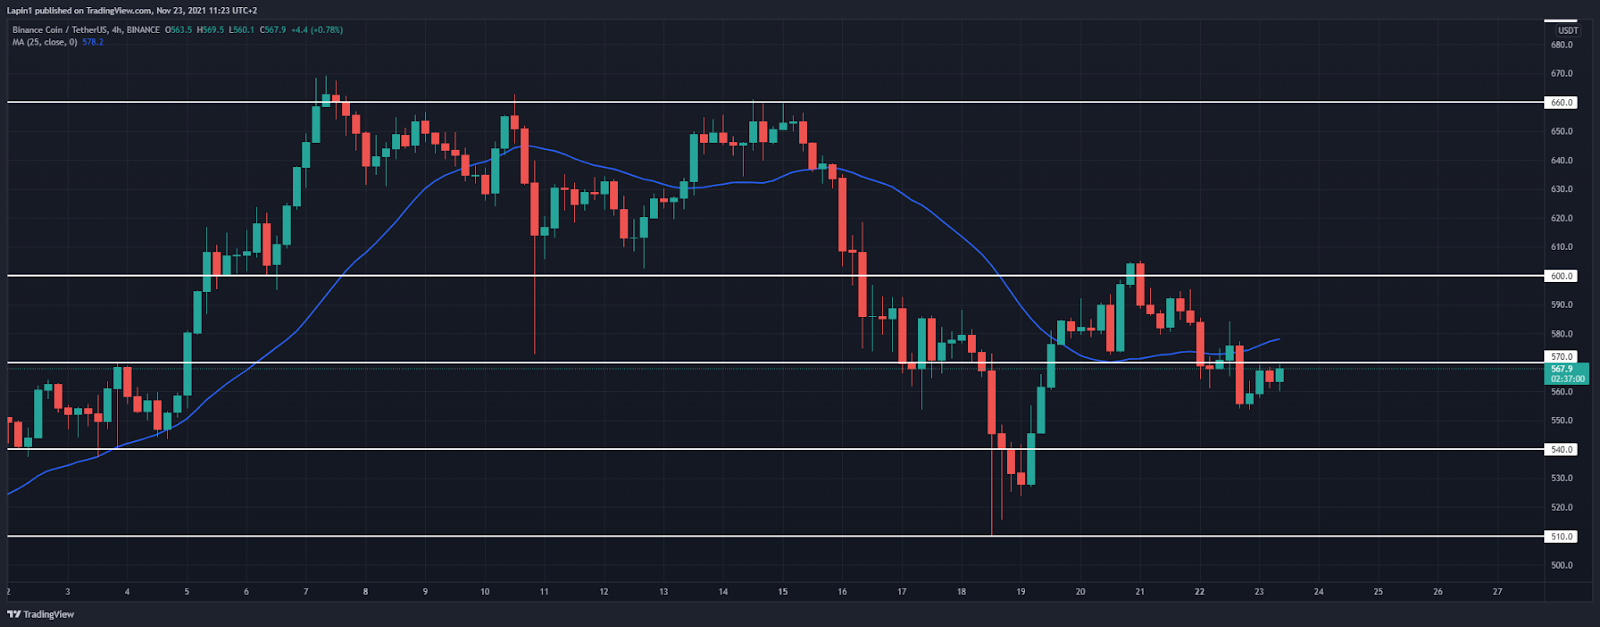 Binance Coin Price Analysis: BNB continues lower, targets $540 next?